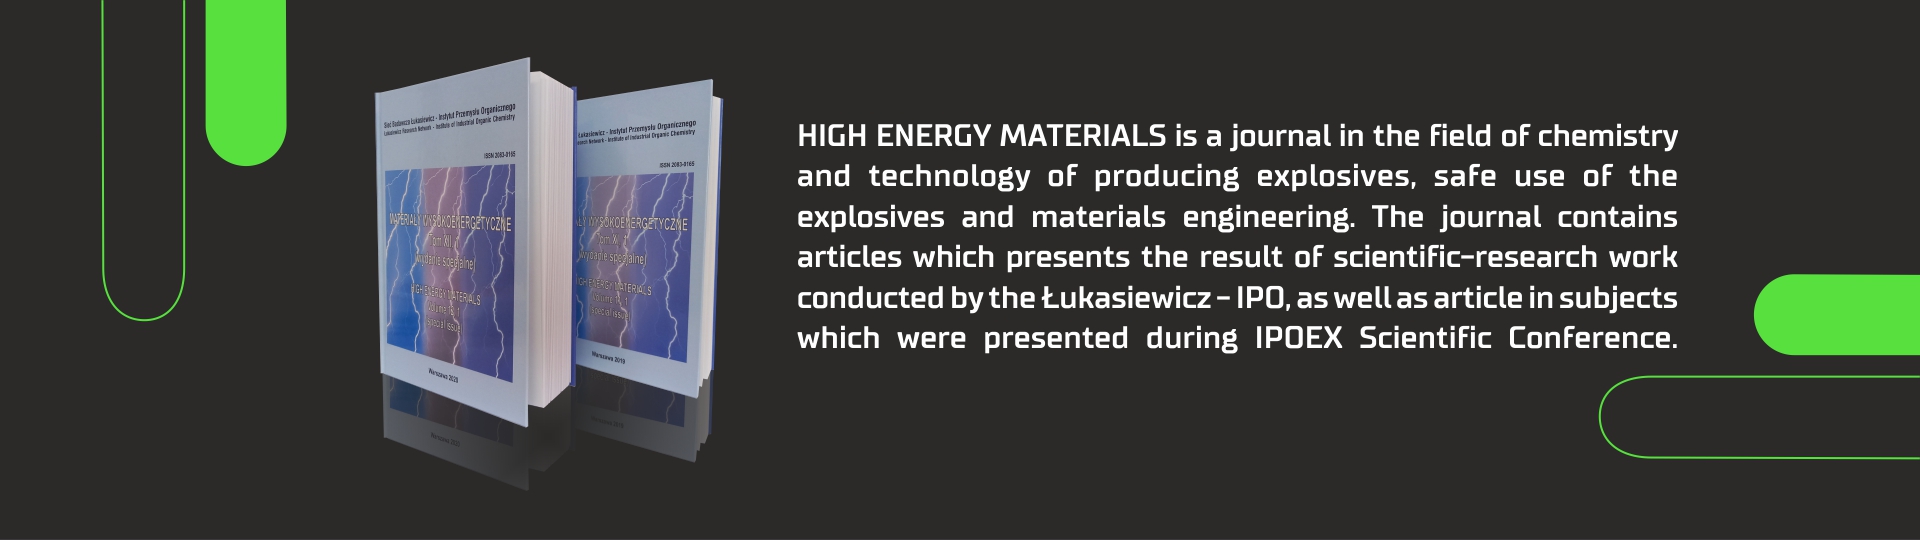 High Energy Materials is a journal in the field of chemistry and technology of producing explosives, safe use of the explosives and materials engineering. The journal contains articles which prestens the result of scientific-research work conducted by the Lukasiewicz-IPO, as well as article in subjects which were presented during IPOEX Scientific Conference